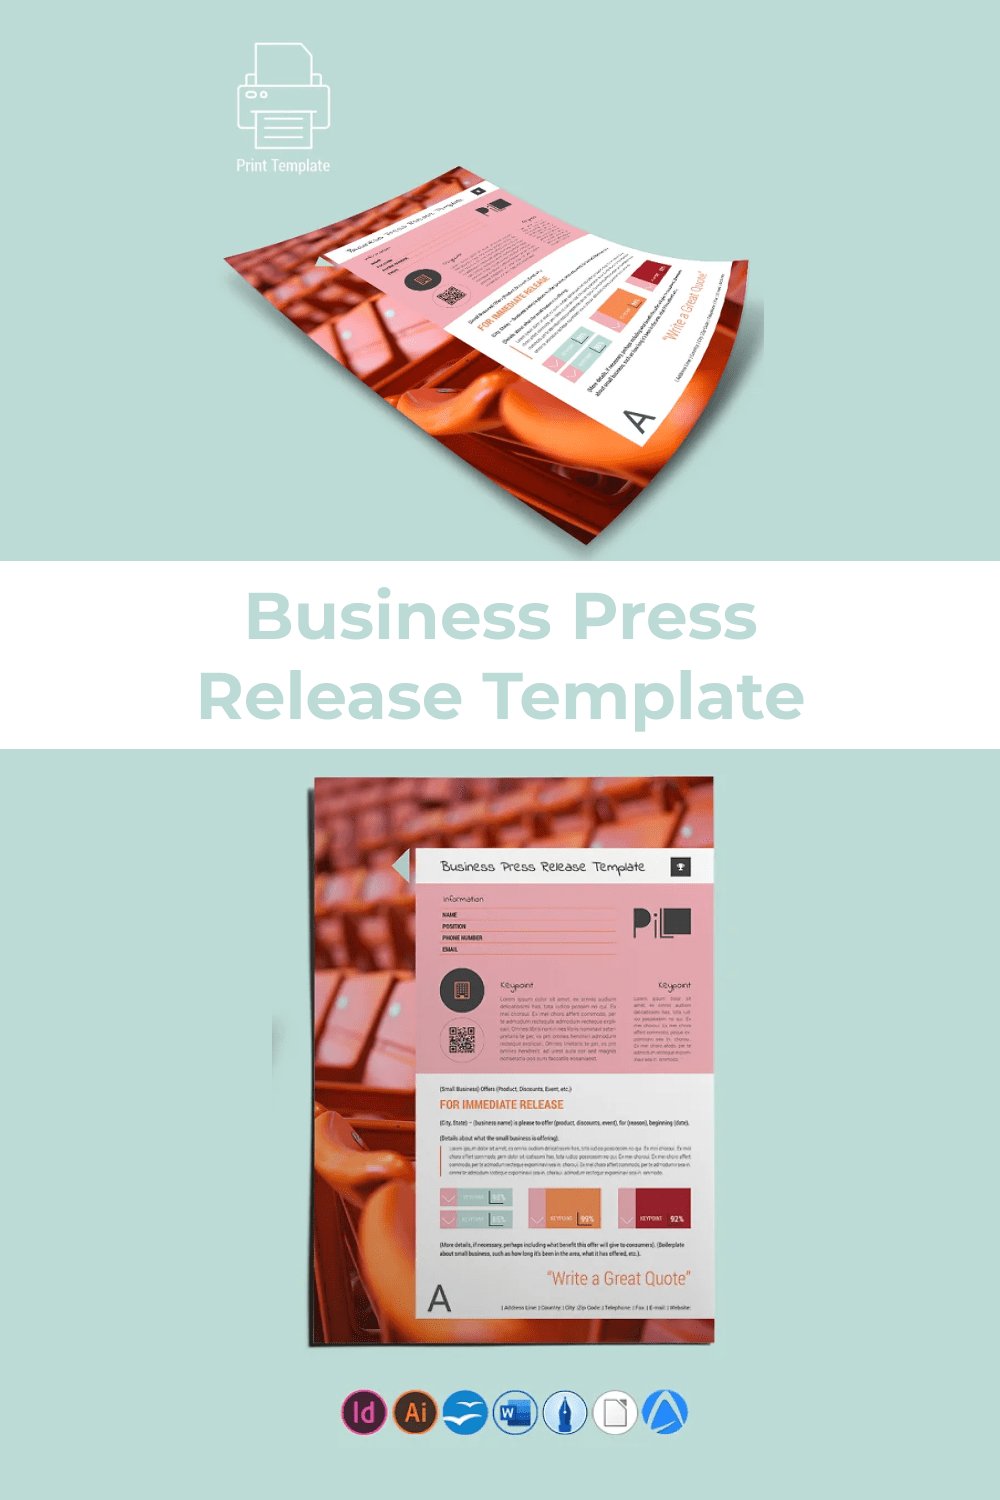 Multivariate press release that will perfectly suit different business needs.